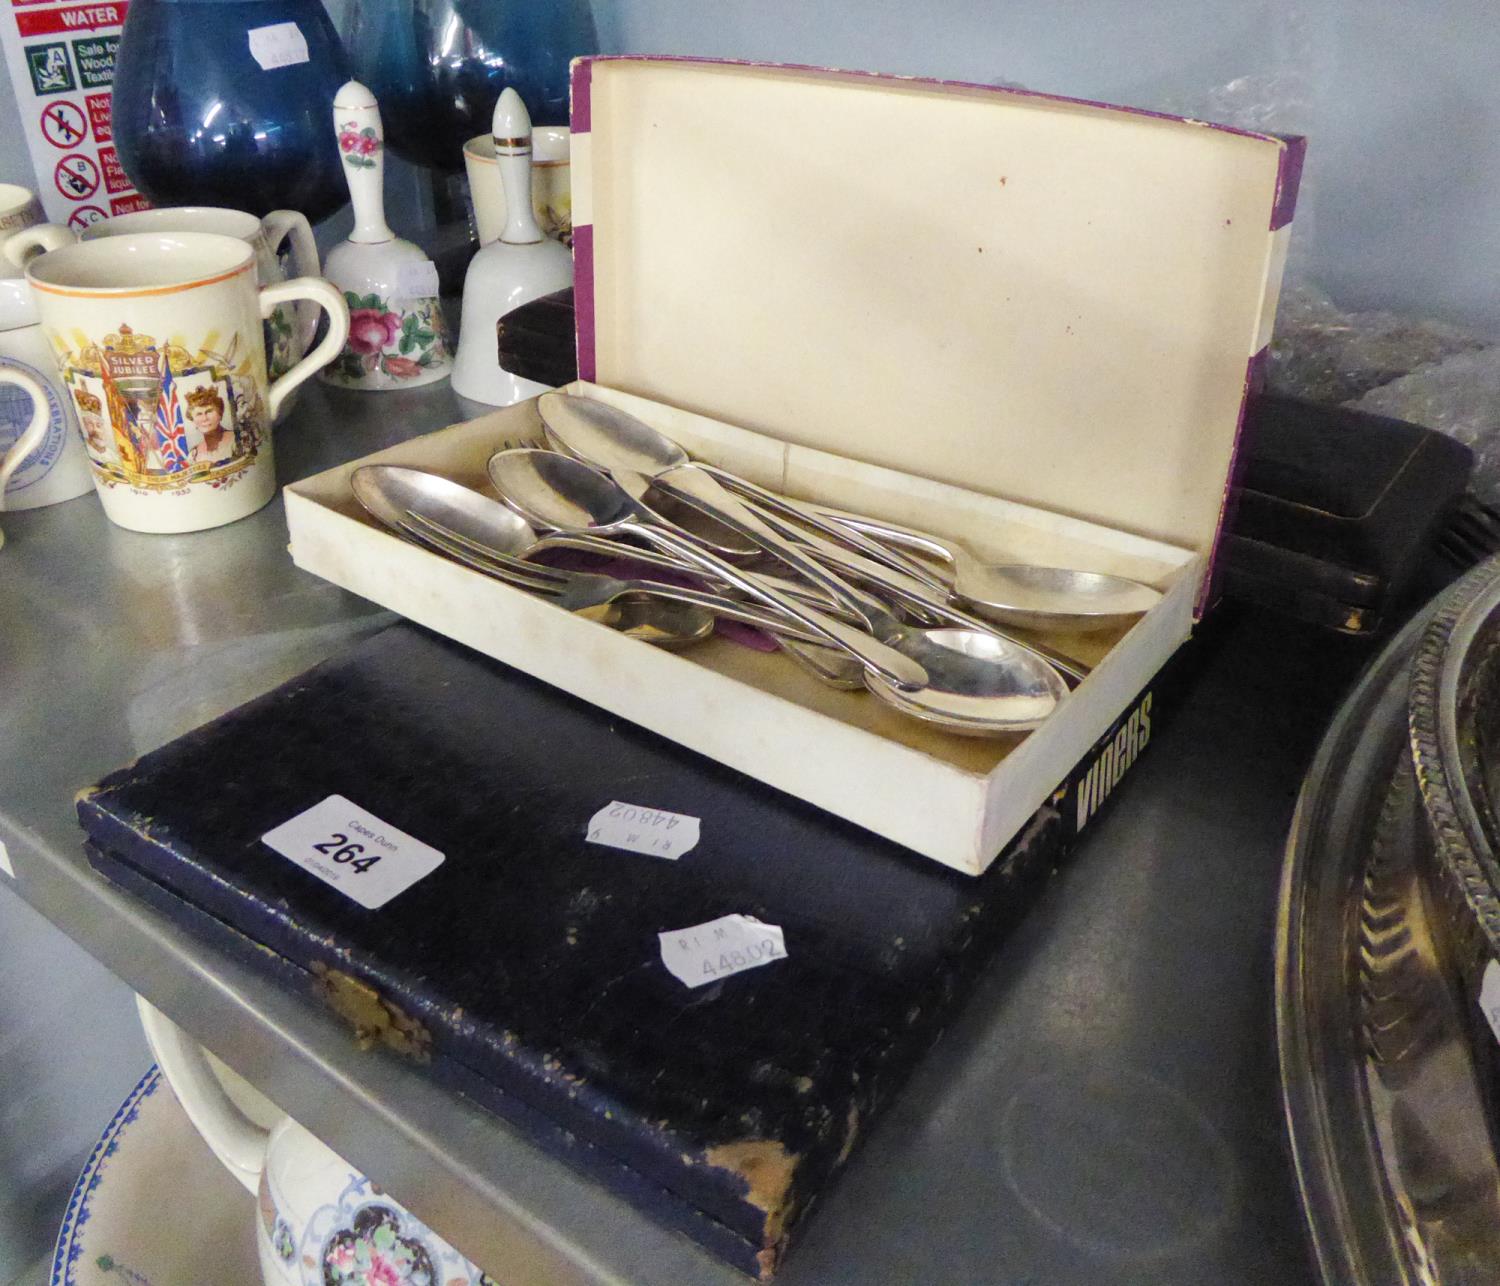 VICTORIAN ELECTROPLATED ENGRAVED FISH SERVERS WITH CARVED IVORY HANDLES, IN CASE; A CASED SET OF